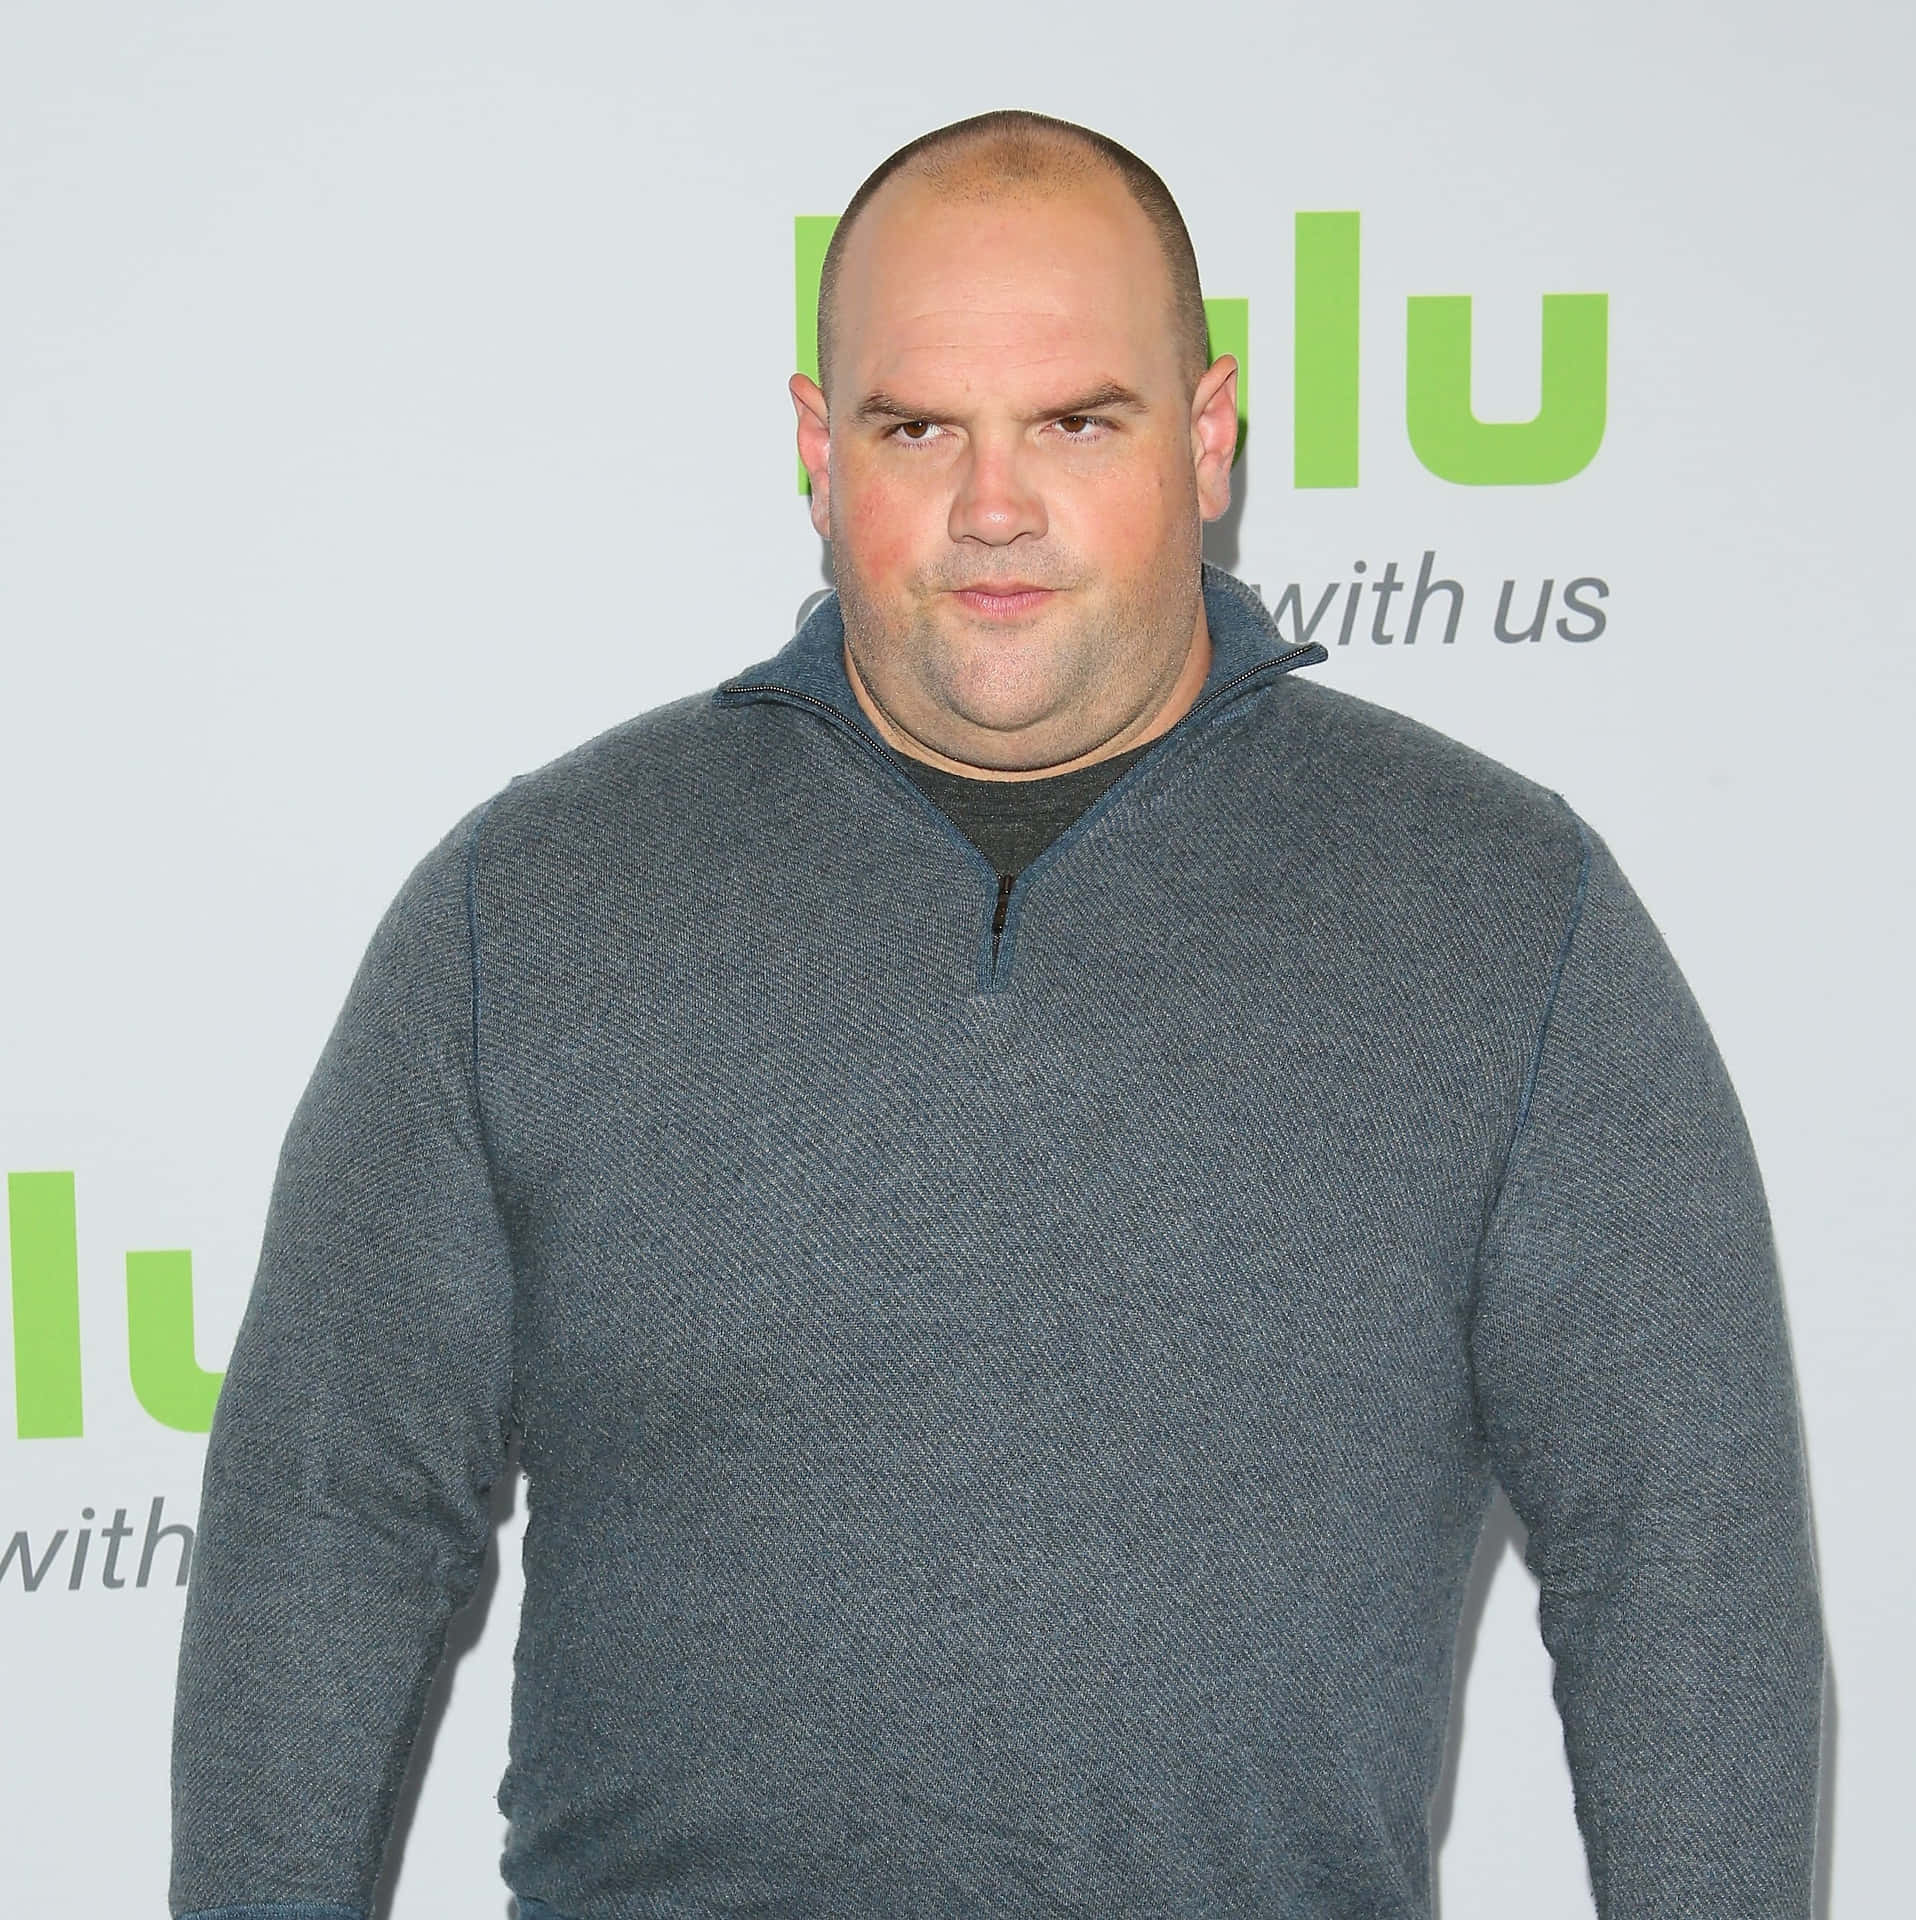 Ethansuplee Would Not Be Appropriate In The Context Of Computer Or Mobile Wallpaper, As He Is An Actor And Not Typically Associated With Wallpapers. However, I Can Provide A Translation Of The Phrase 